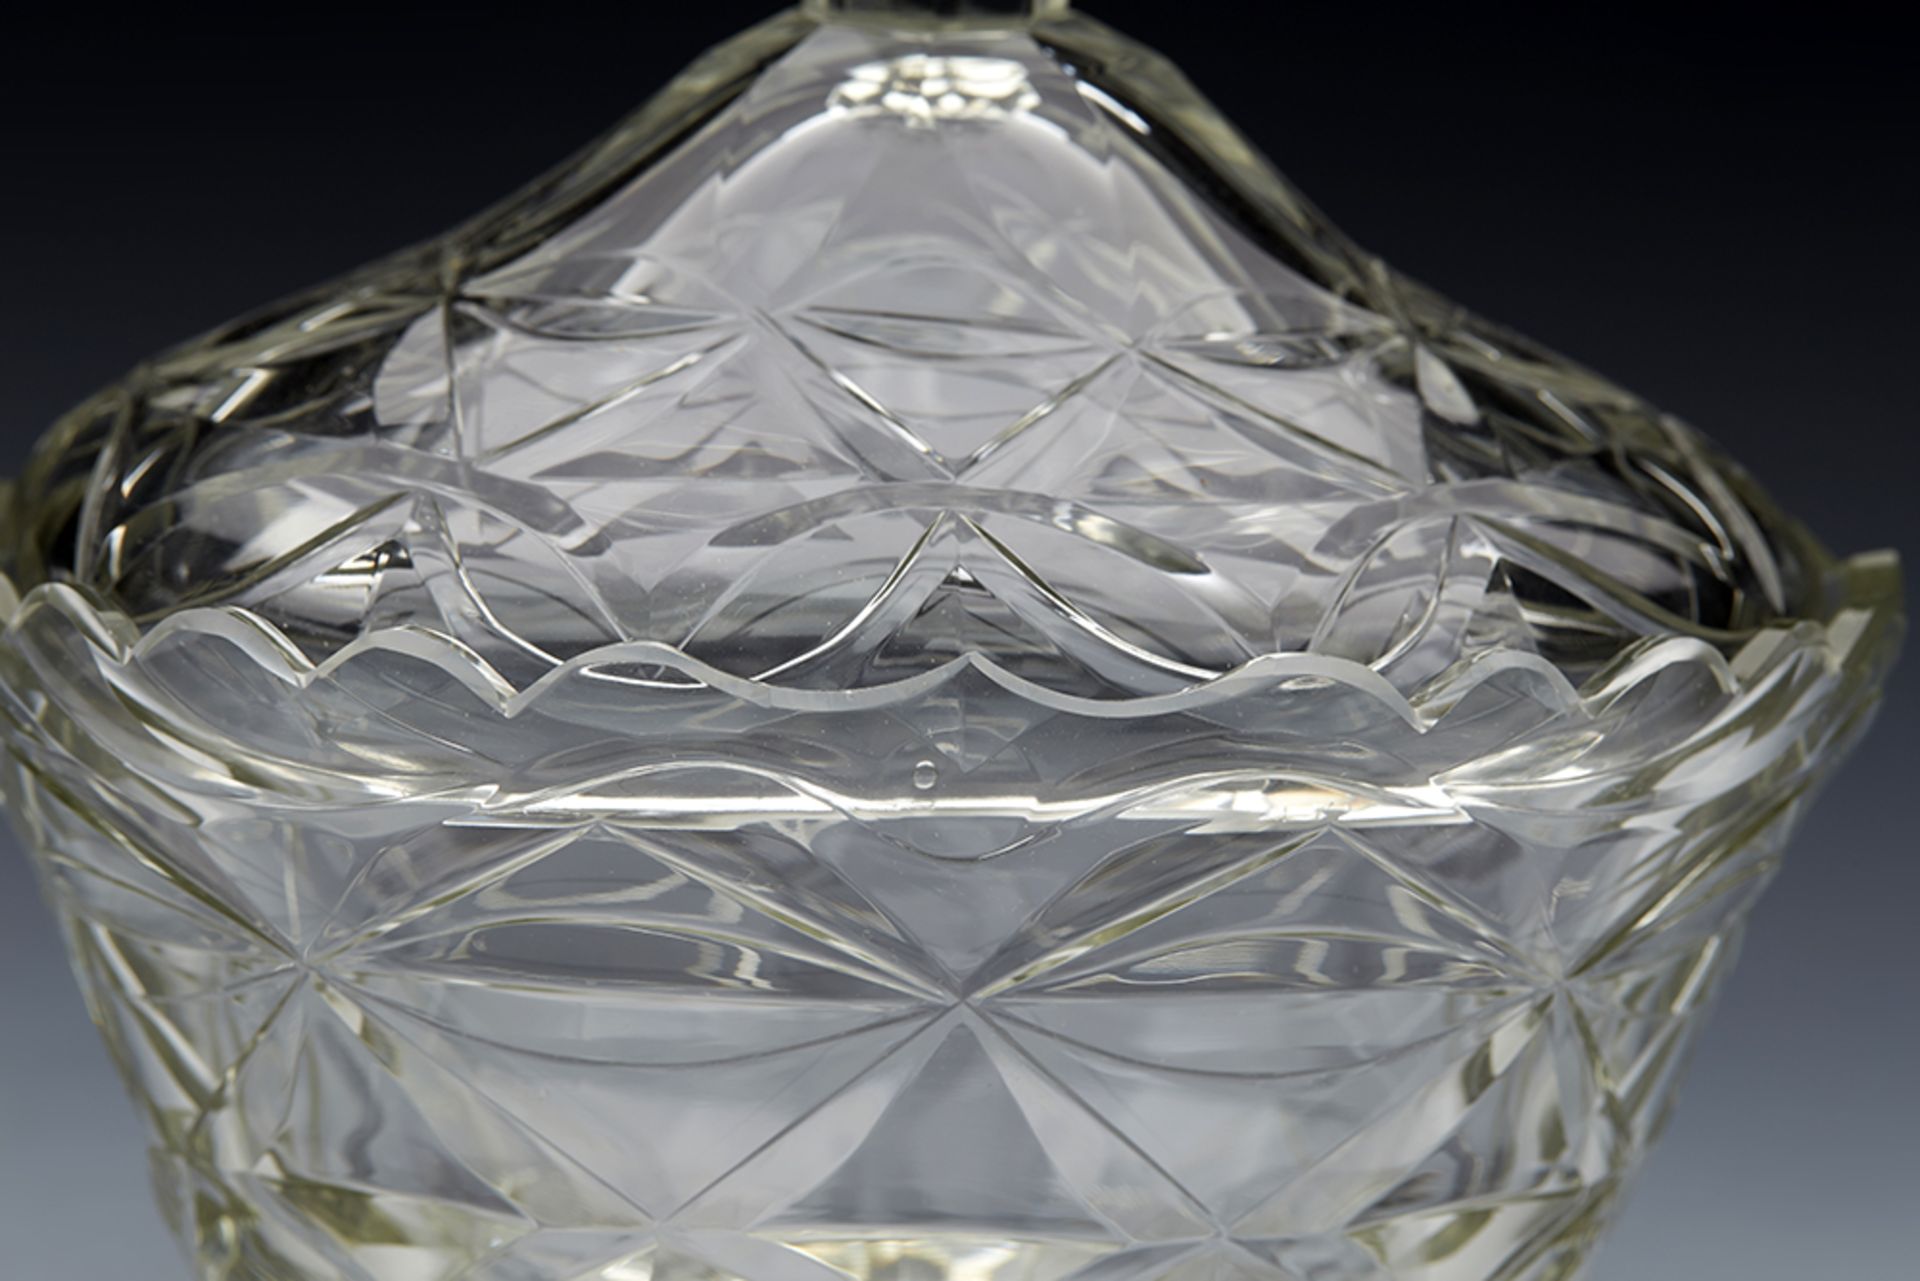 Antique Cut Glass Lidded Butter Dish And Stand Early 19Th C. - Image 11 of 15